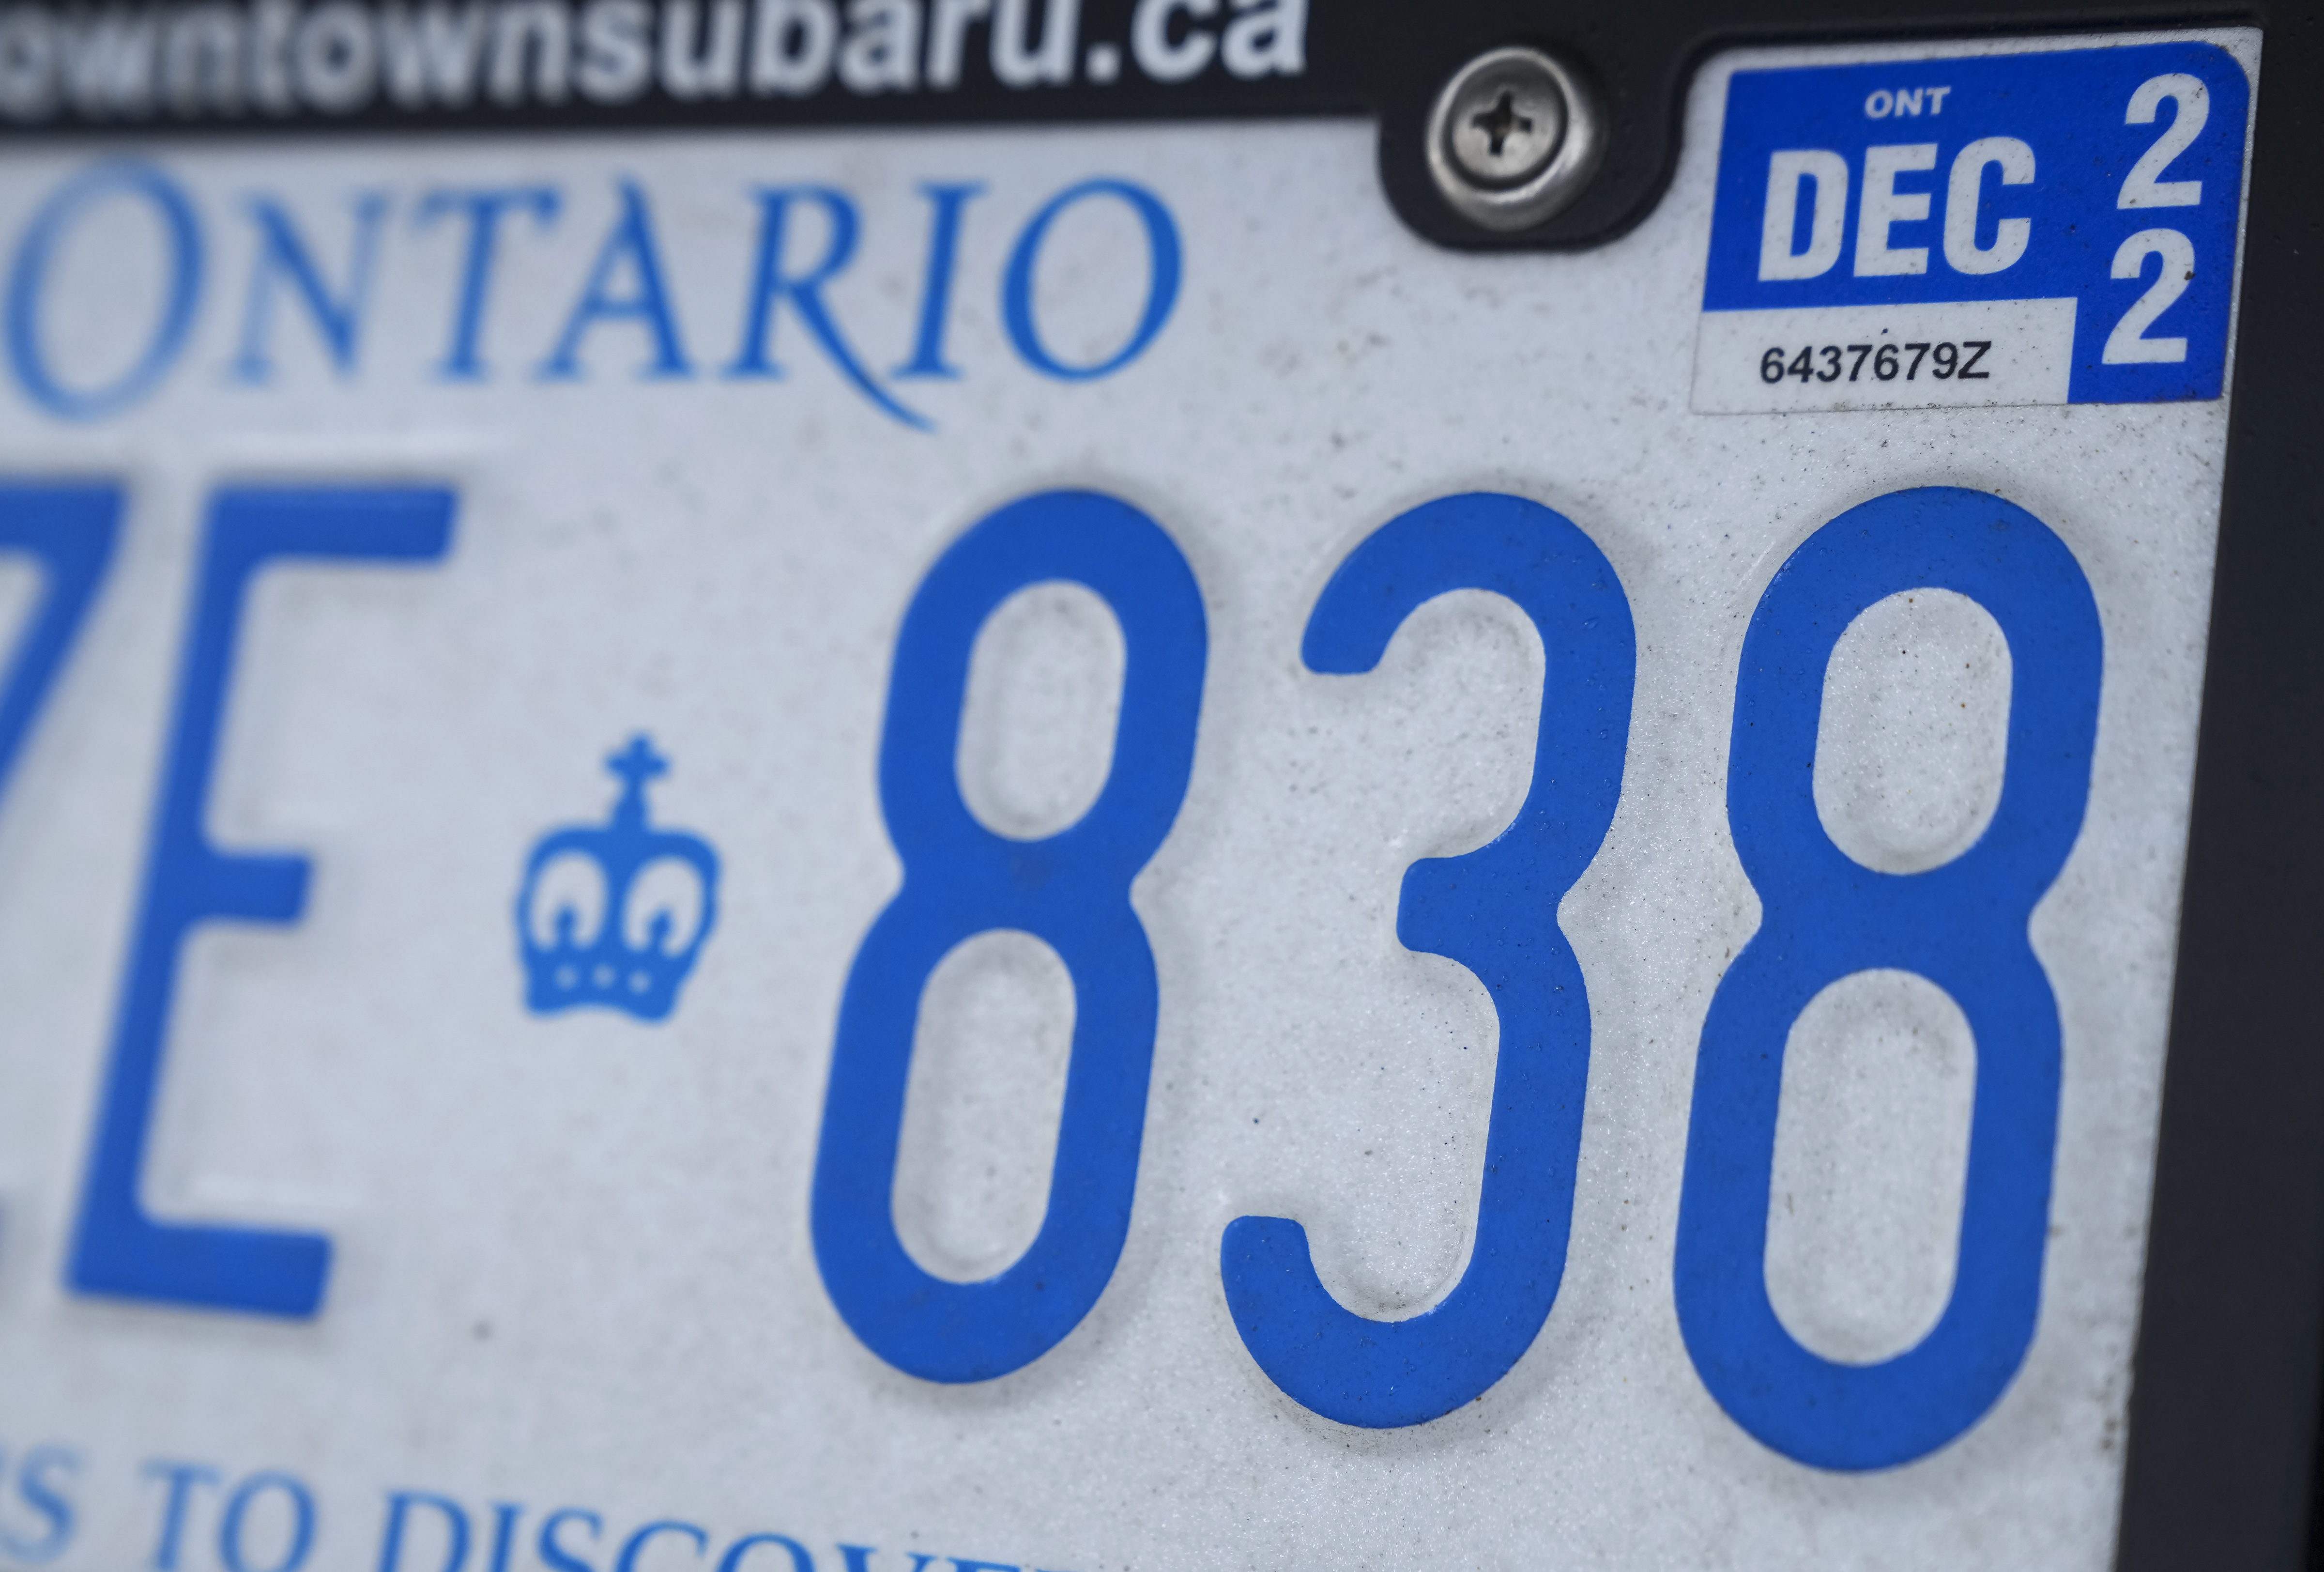 Unregistered Ontario licence plates spike after renewal fees eliminated